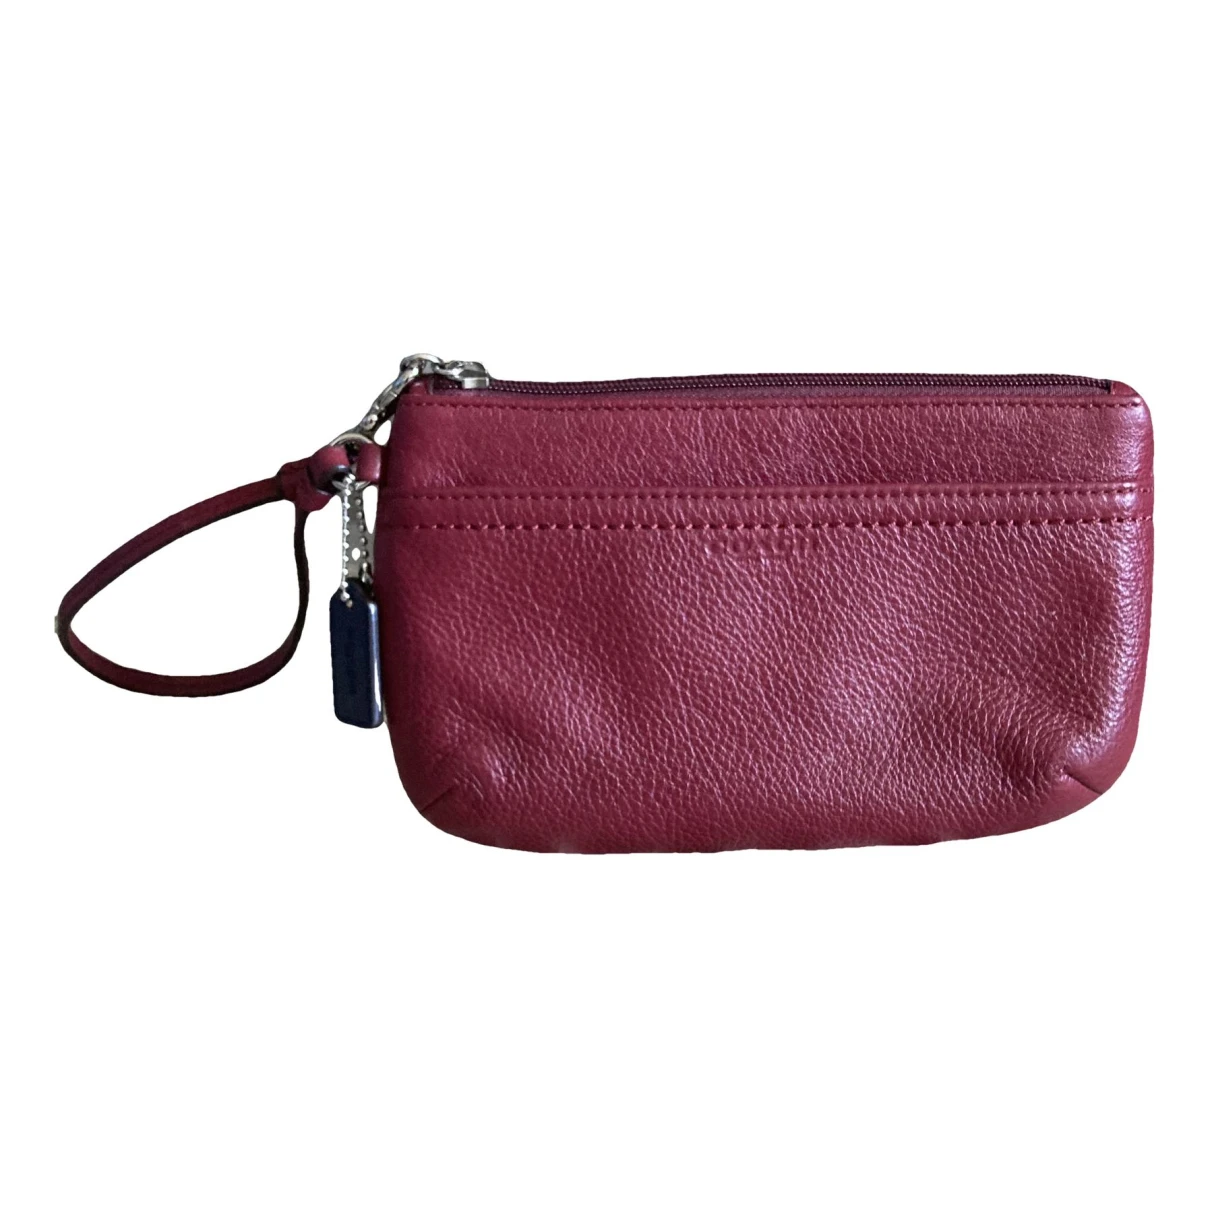 Pre-owned Coach Leather Clutch Bag In Burgundy